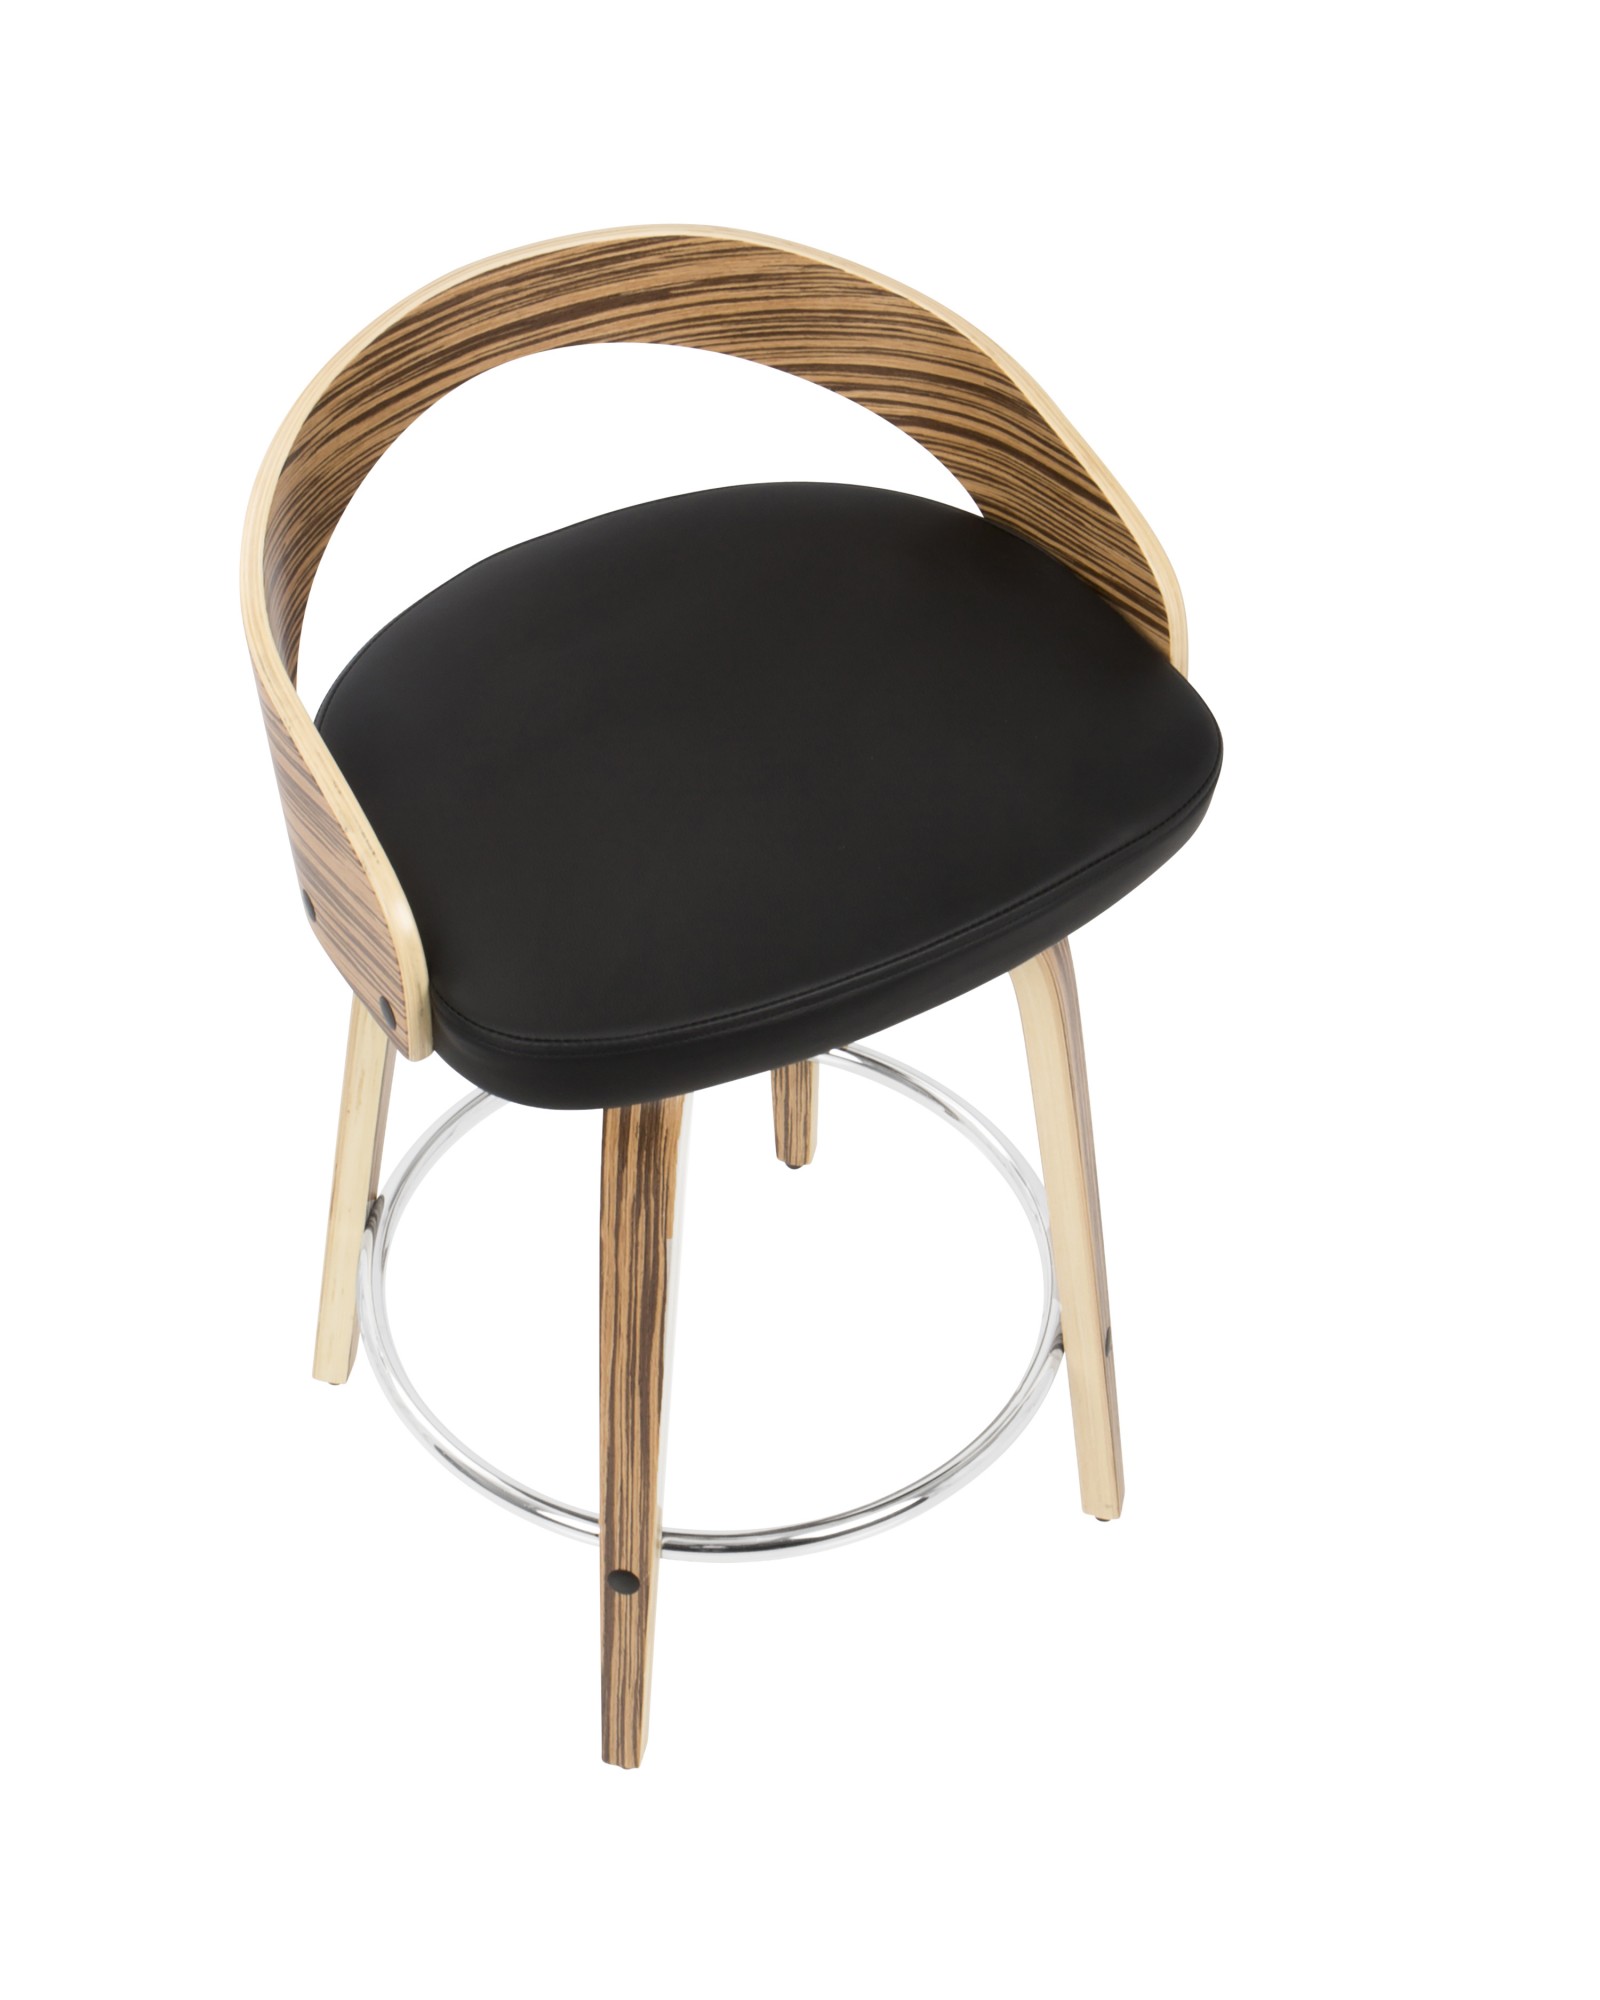 Grotto Mid-Century Modern Counter Stool with Swivel in Zebra Wood and Black Faux Leather